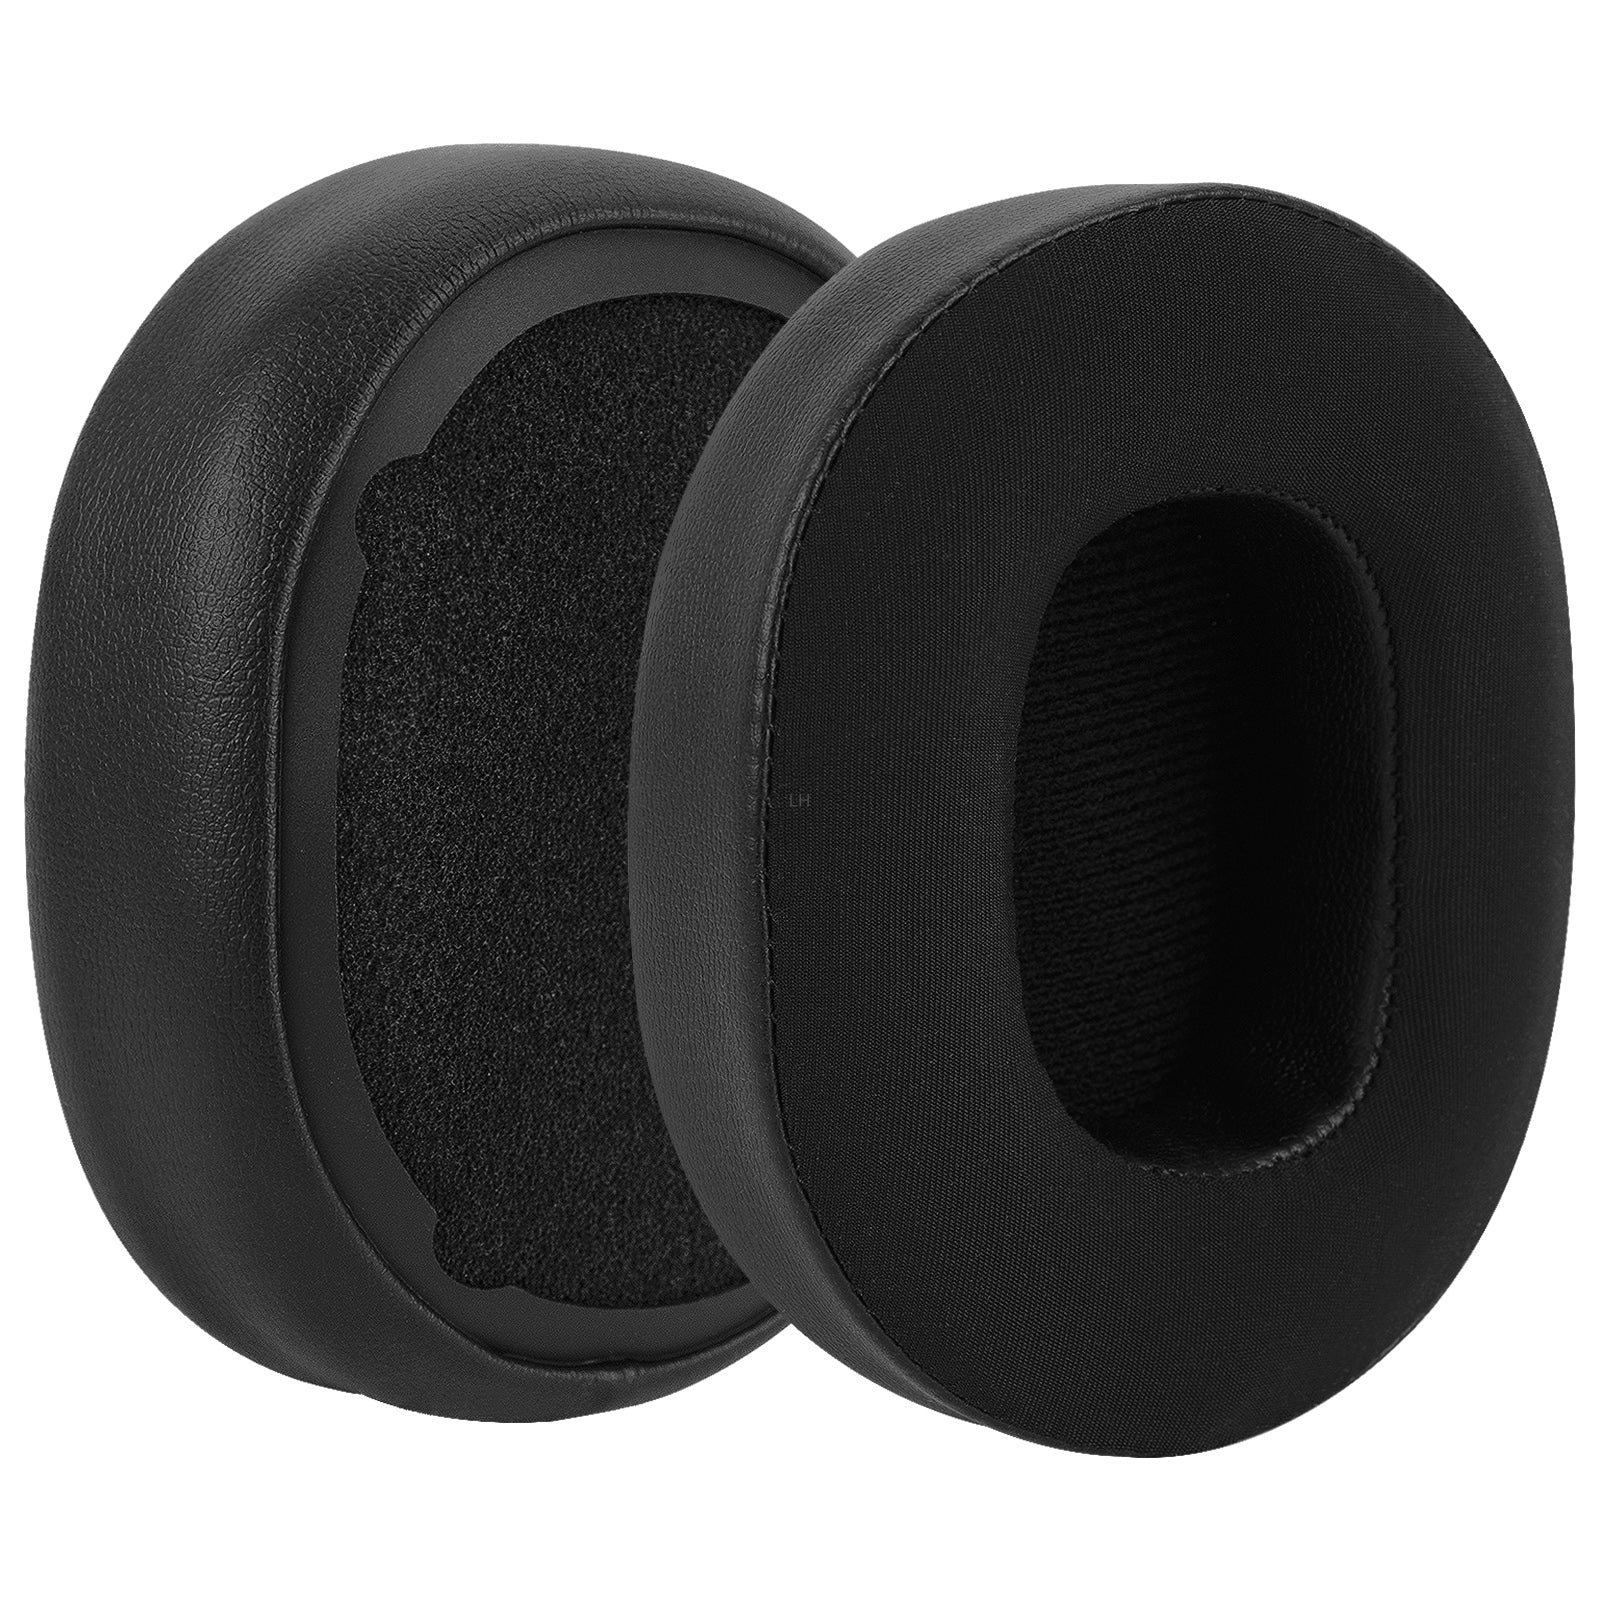 Geekria Sport Cooling-Gel Replacement Ear Pads for Skullcandy Crusher